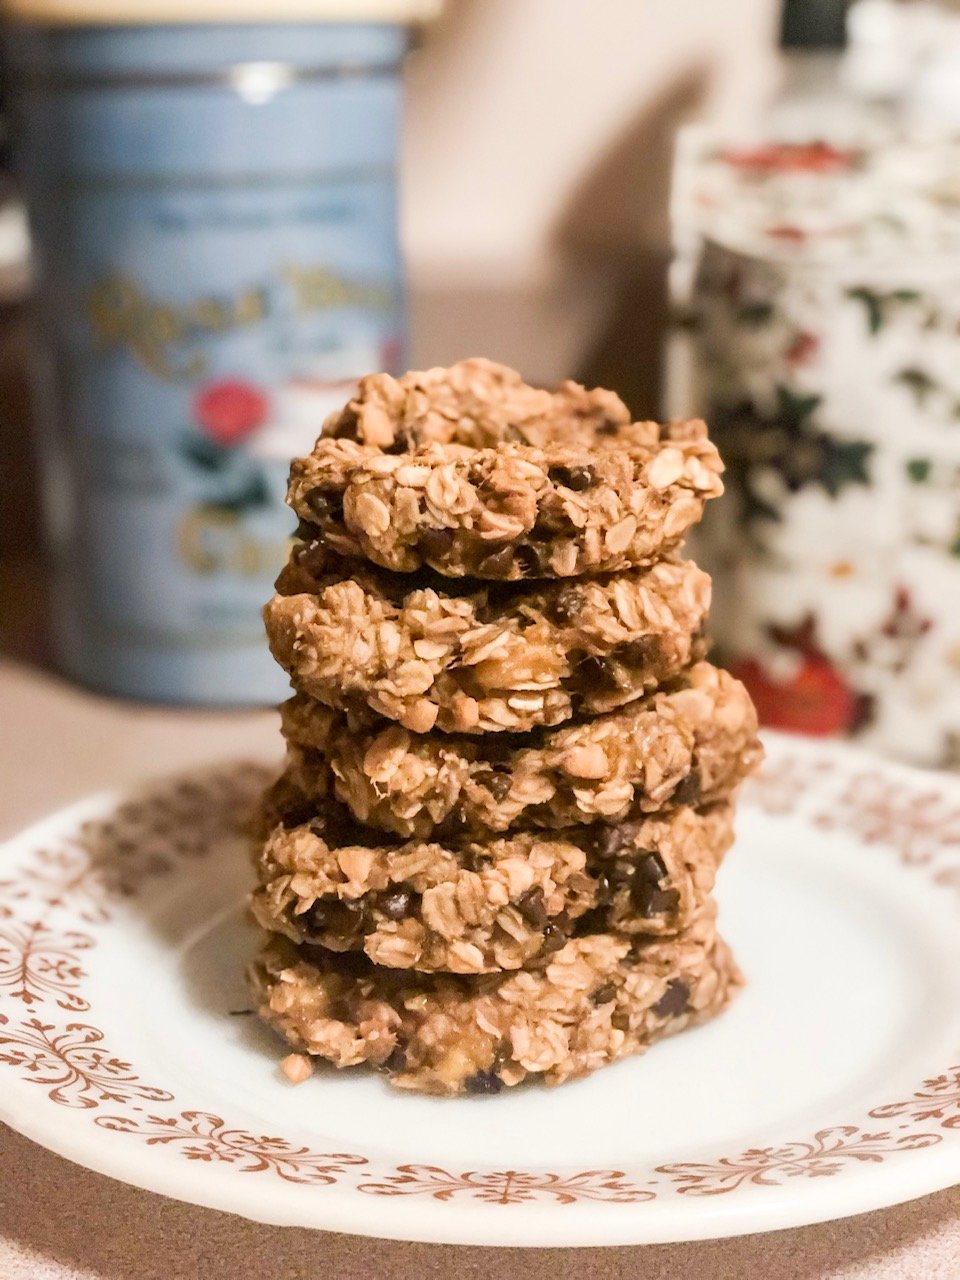 These breakfast cookies are super filling and guilt free! This recipe makes about 10 cookies.